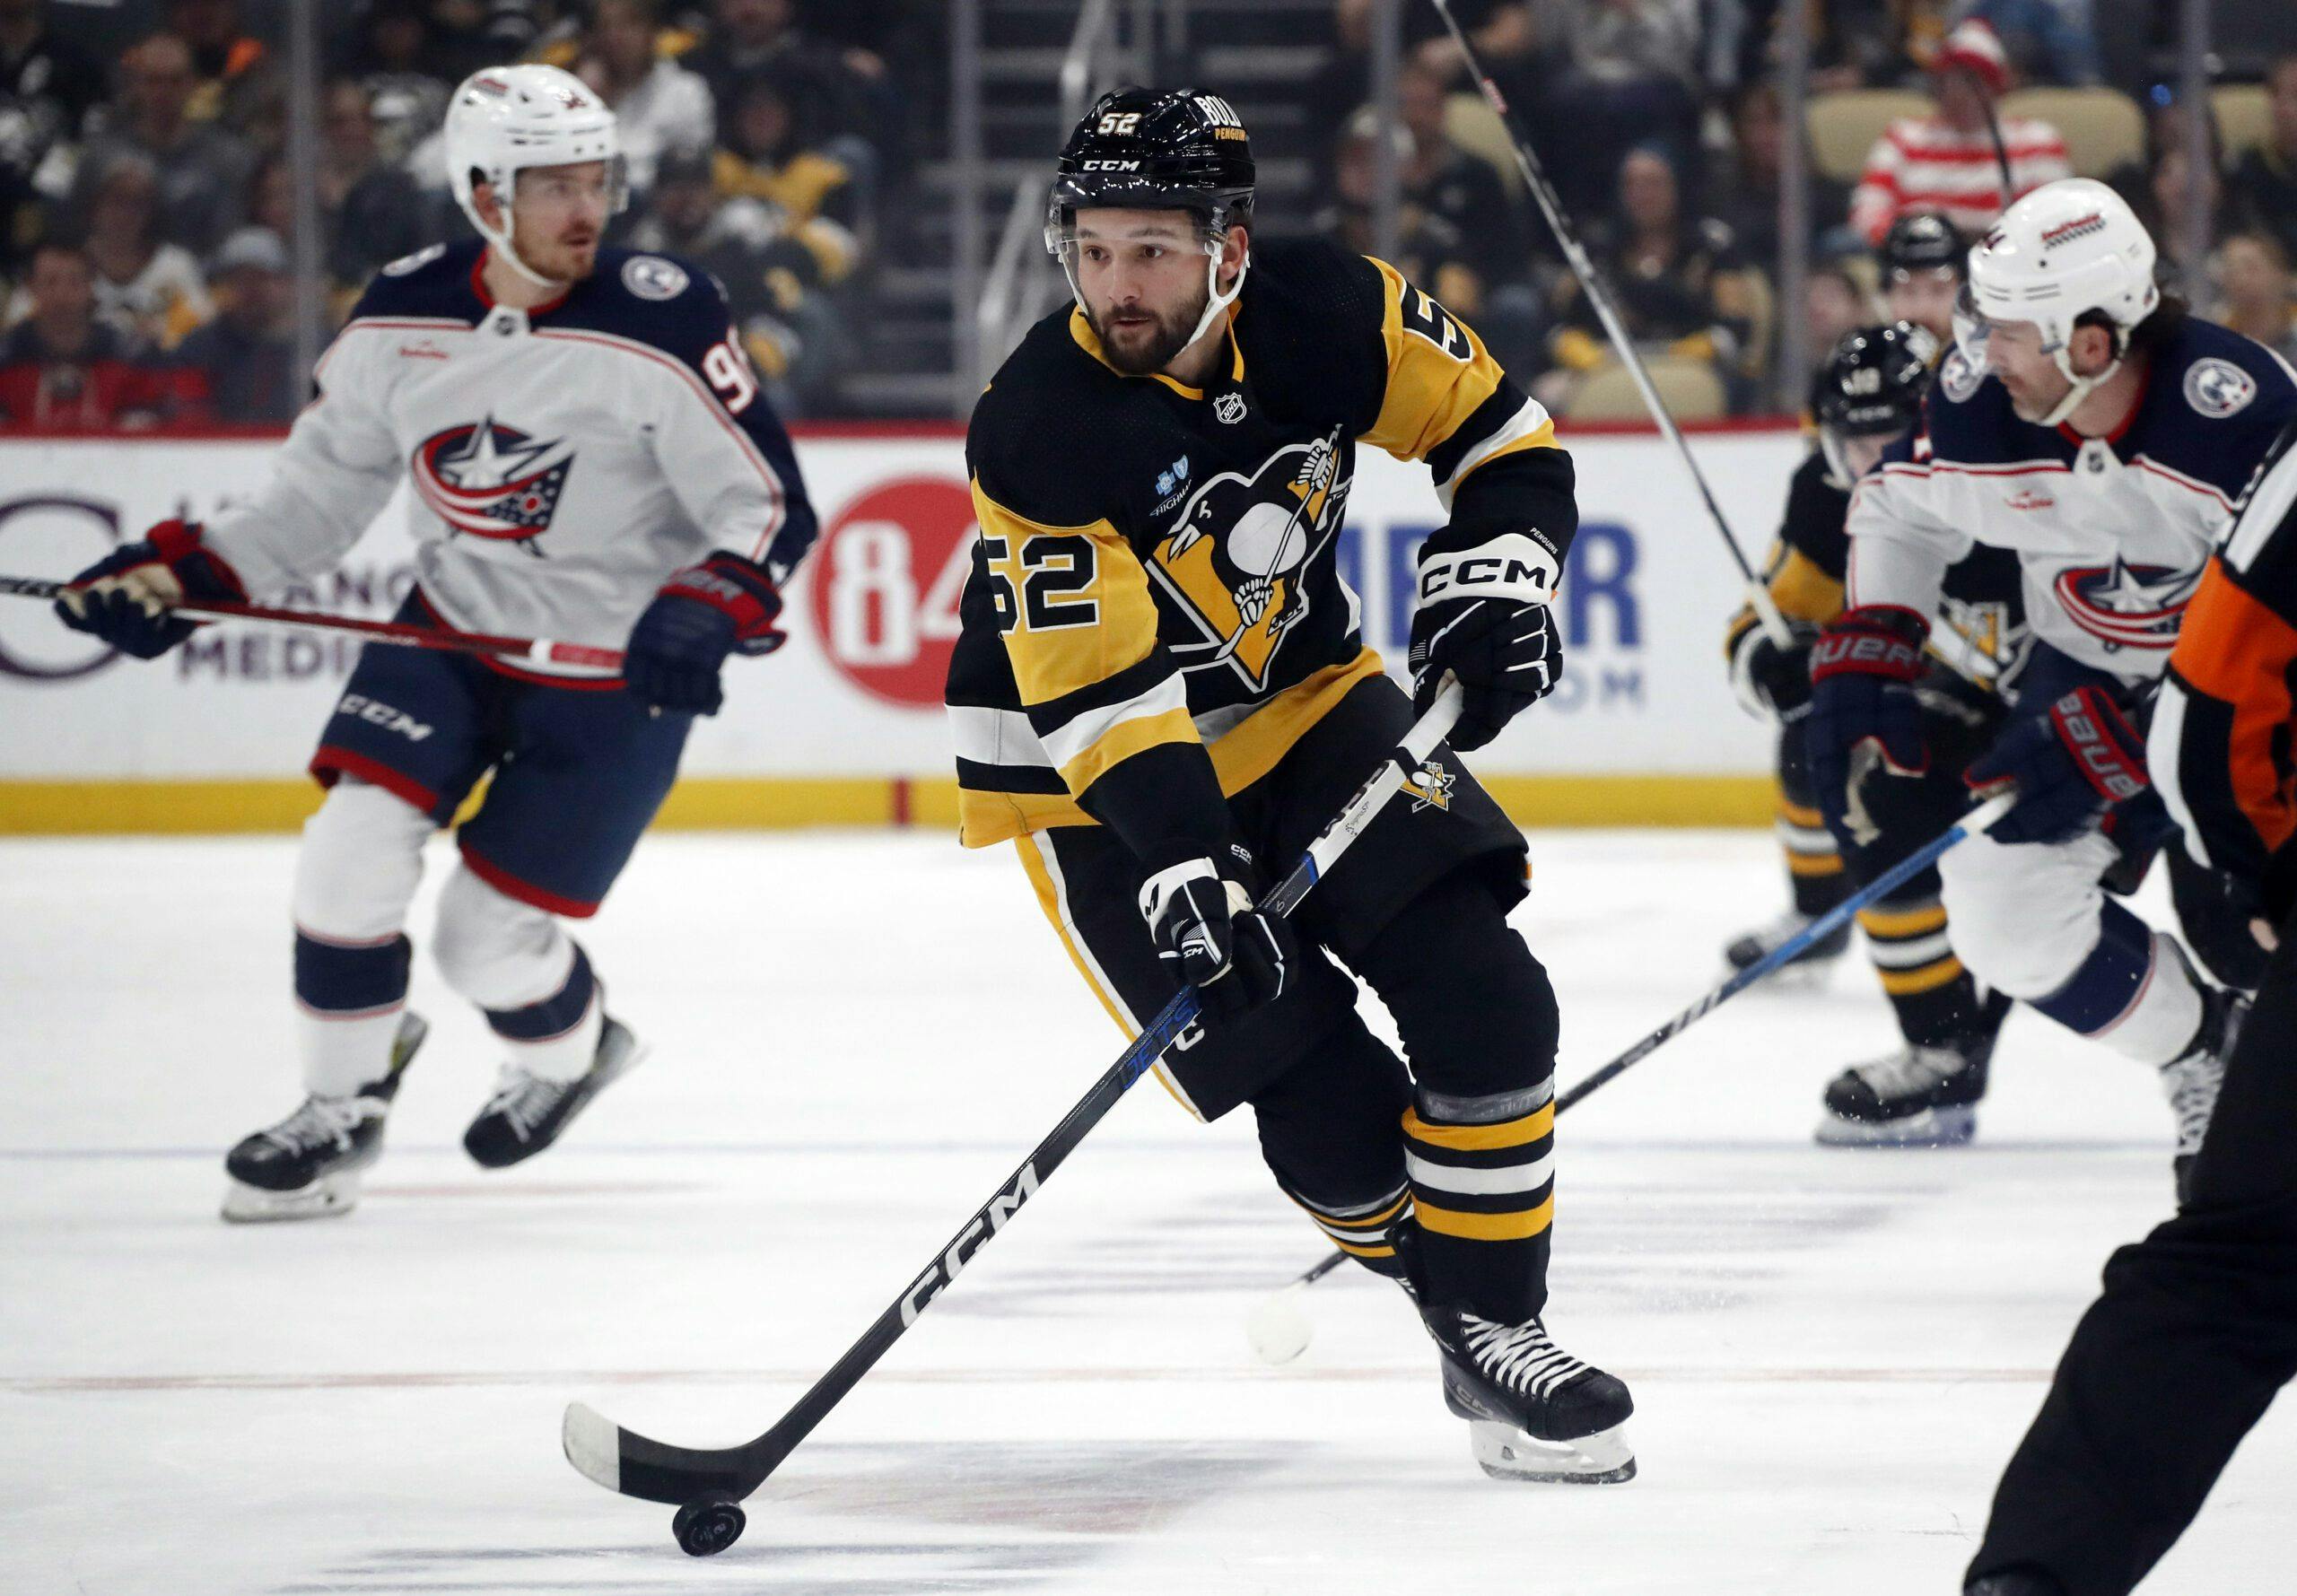 ‘It was a bit of a shock’: Emil Bemström looking forward after trade to Pittsburgh Penguins